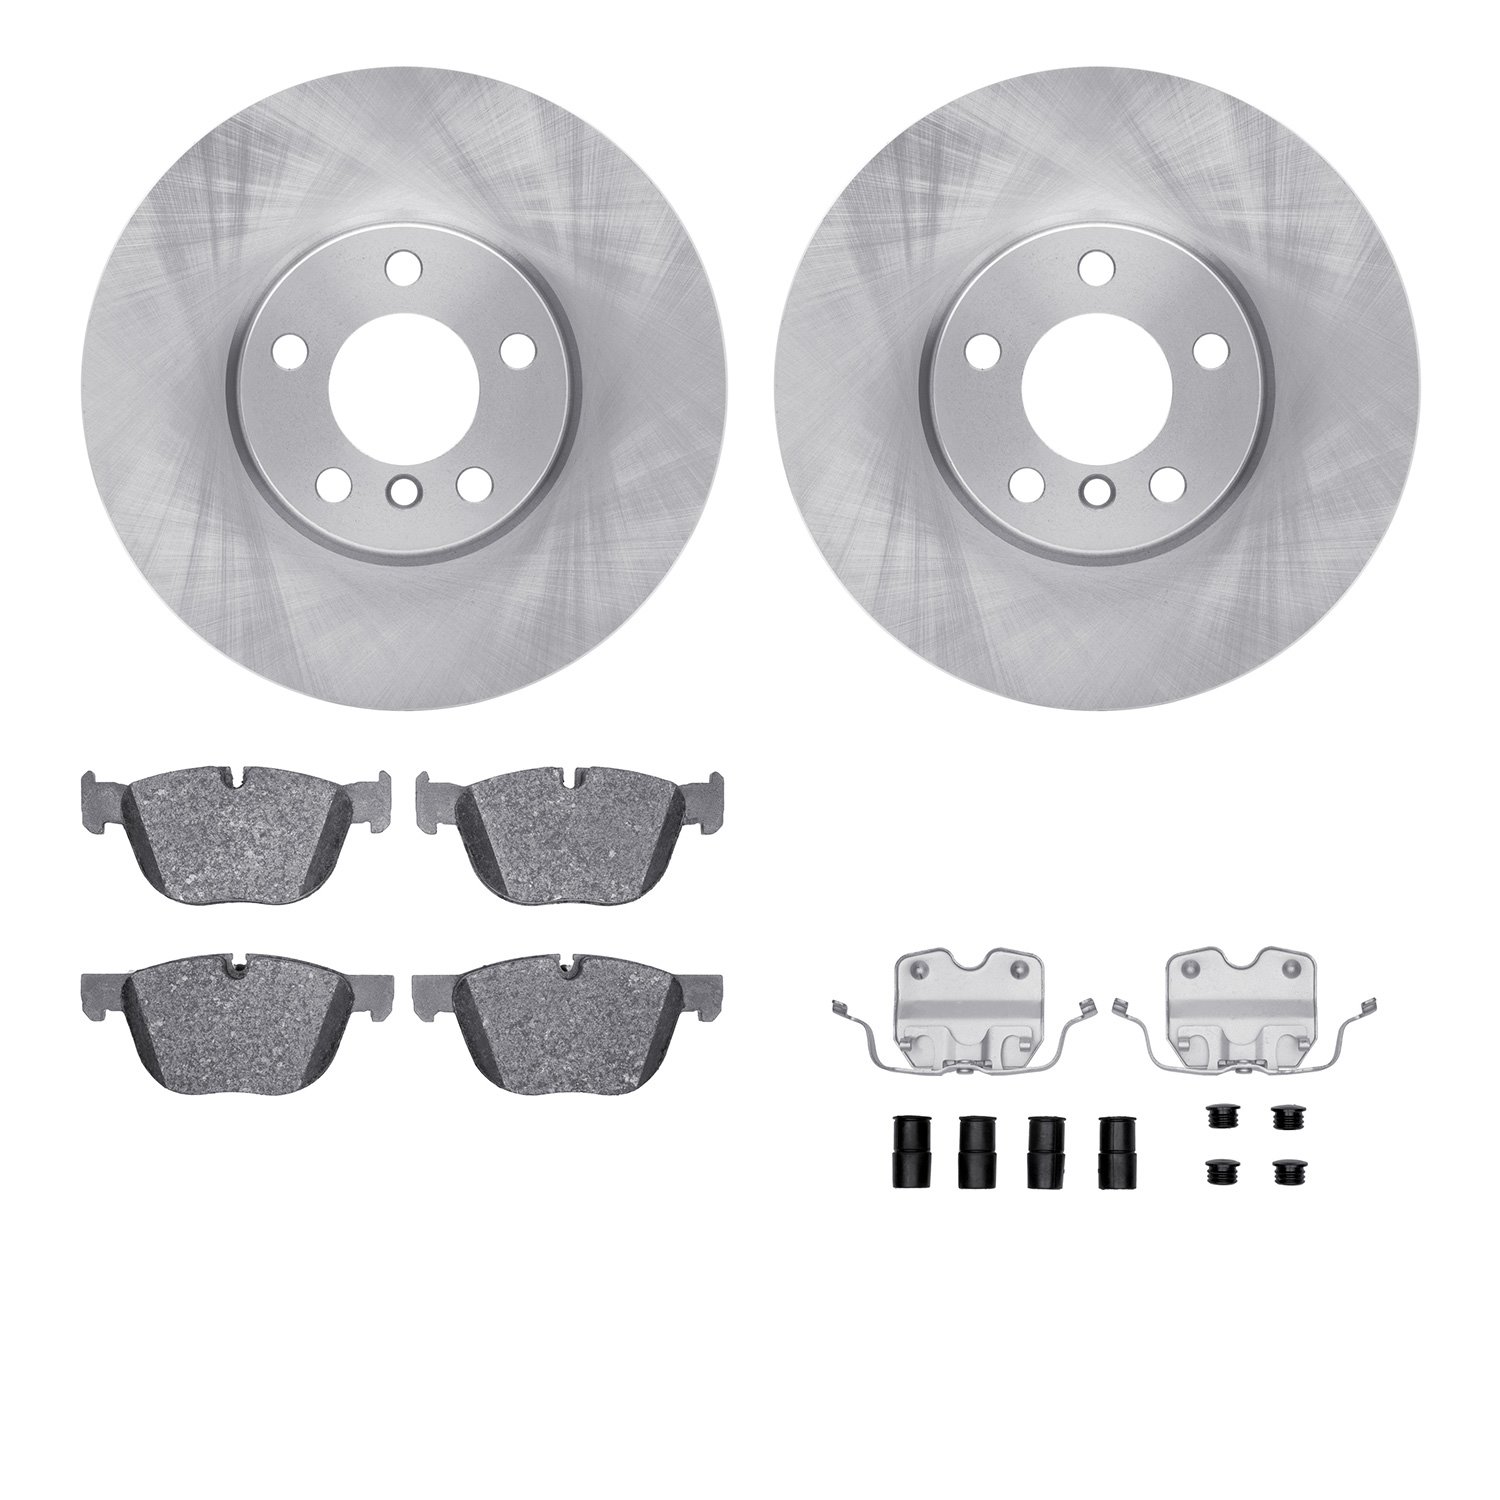 6512-31685 Brake Rotors w/5000 Advanced Brake Pads Kit with Hardware, 2007-2014 BMW, Position: Front